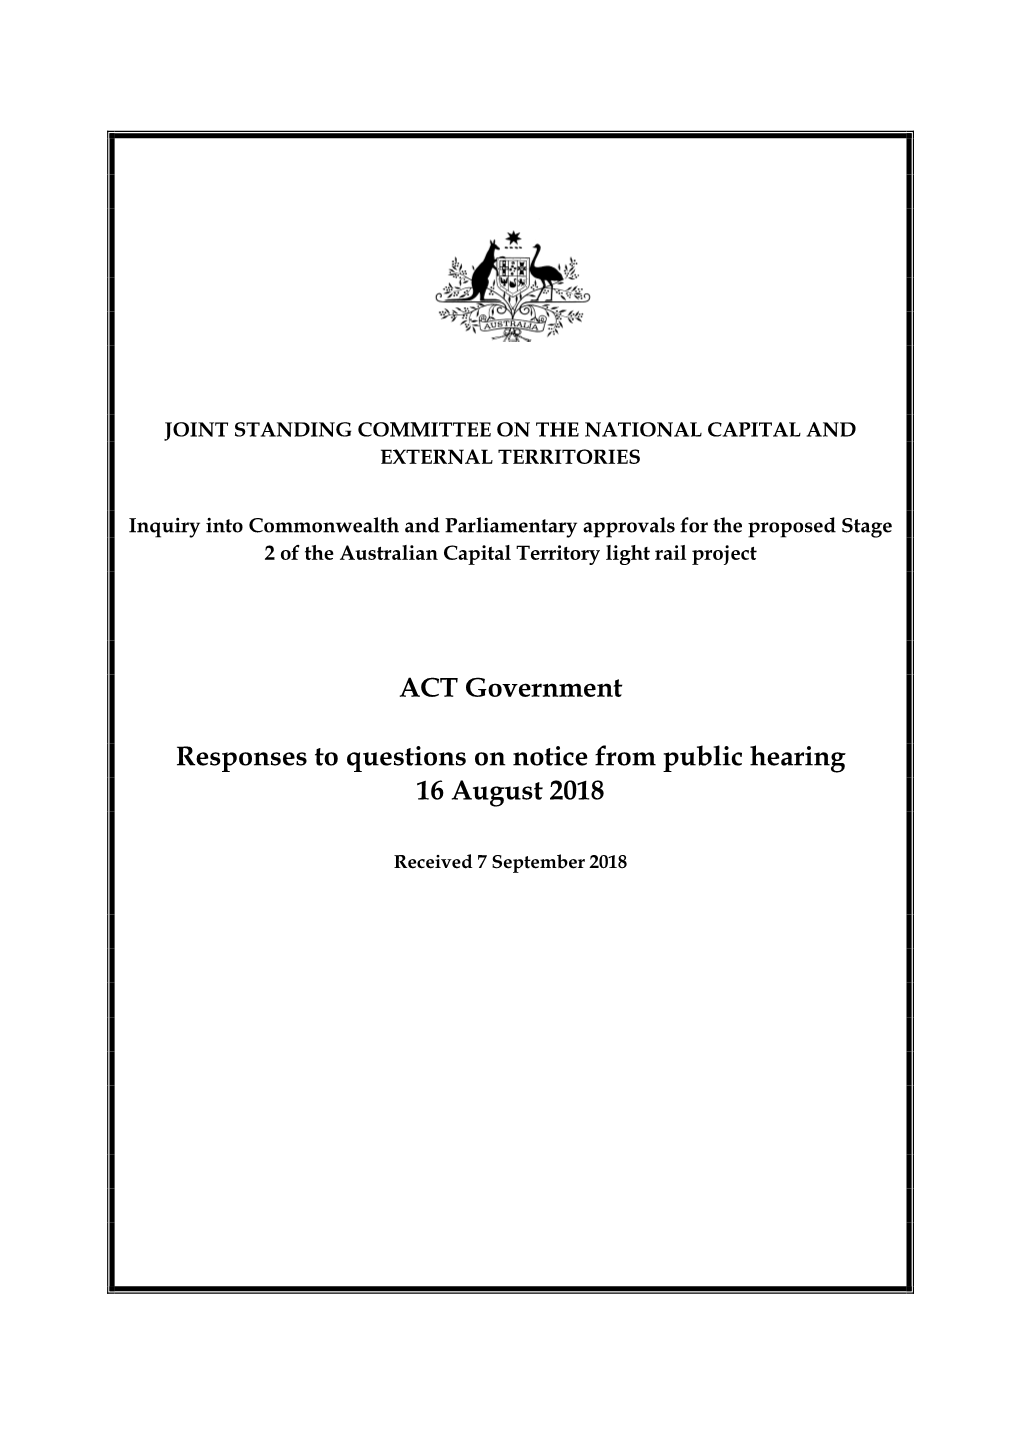 ACT Government Responses to Questions on Notice from Public